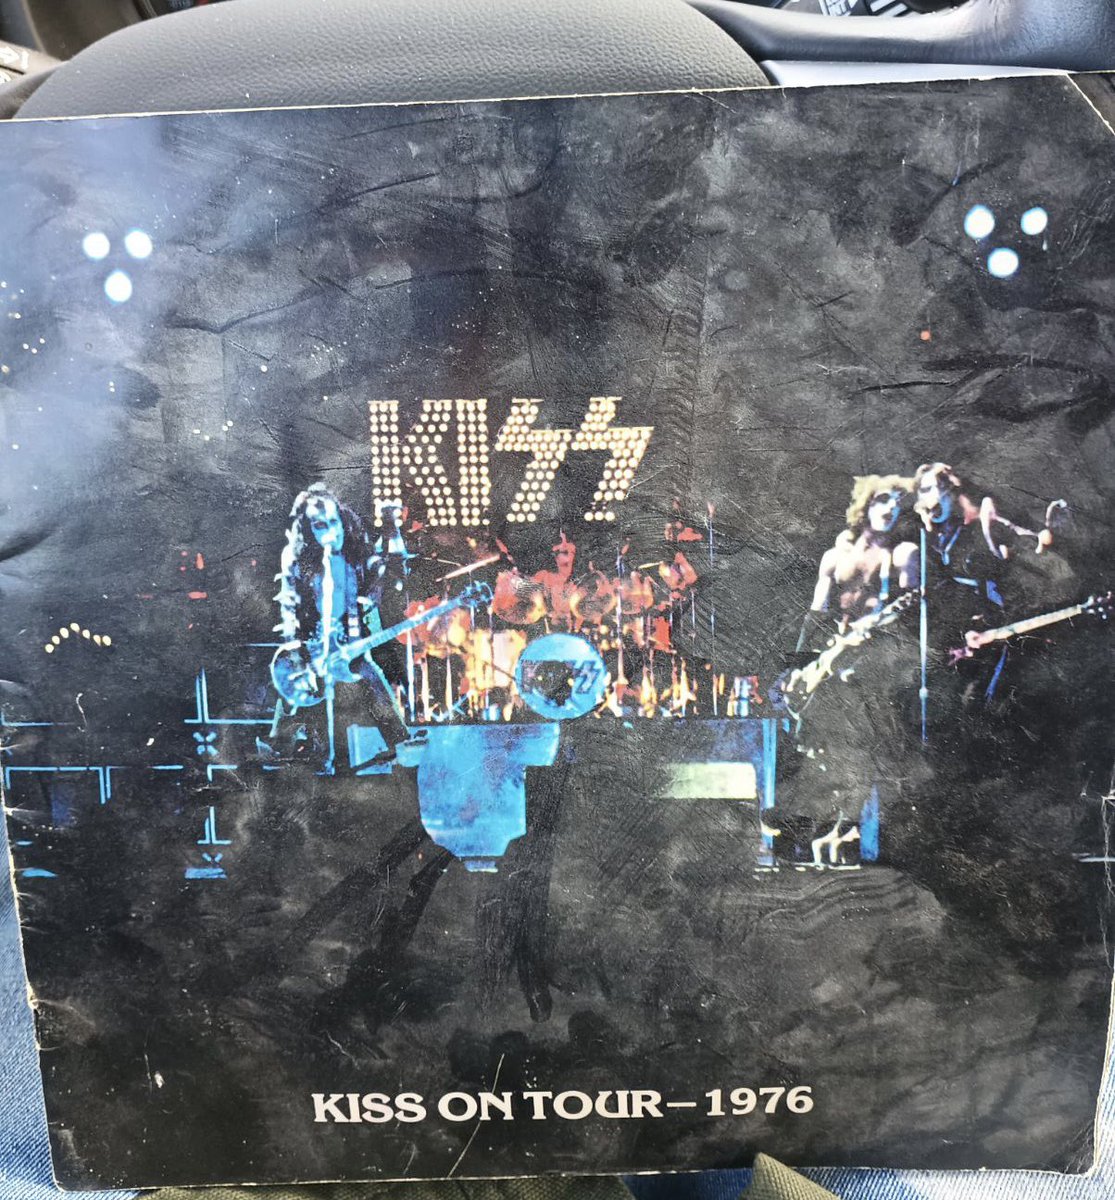 Paid $20 for this beautiful KISS Tour Program. Yay me! #70sKISS